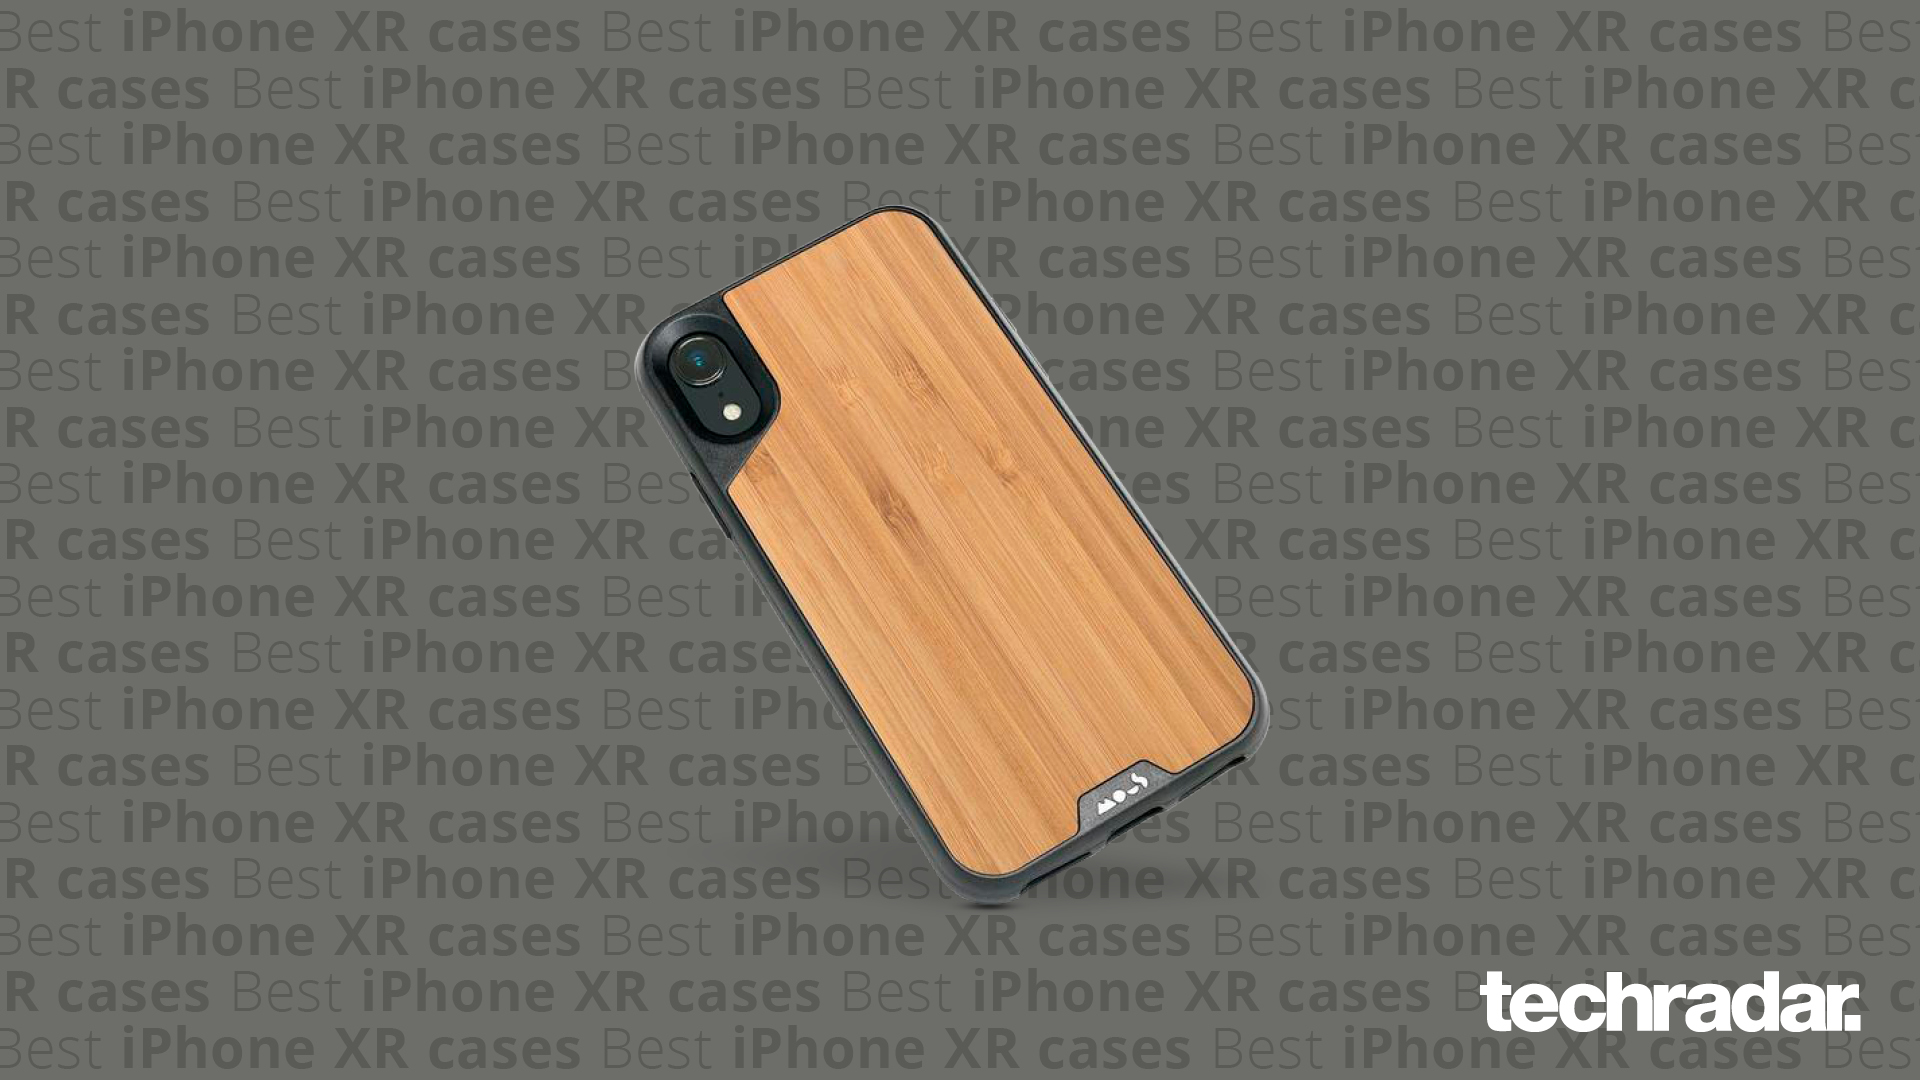 machine lanthaan belediging Best iPhone XR cases: our guide to protecting your phone | TechRadar